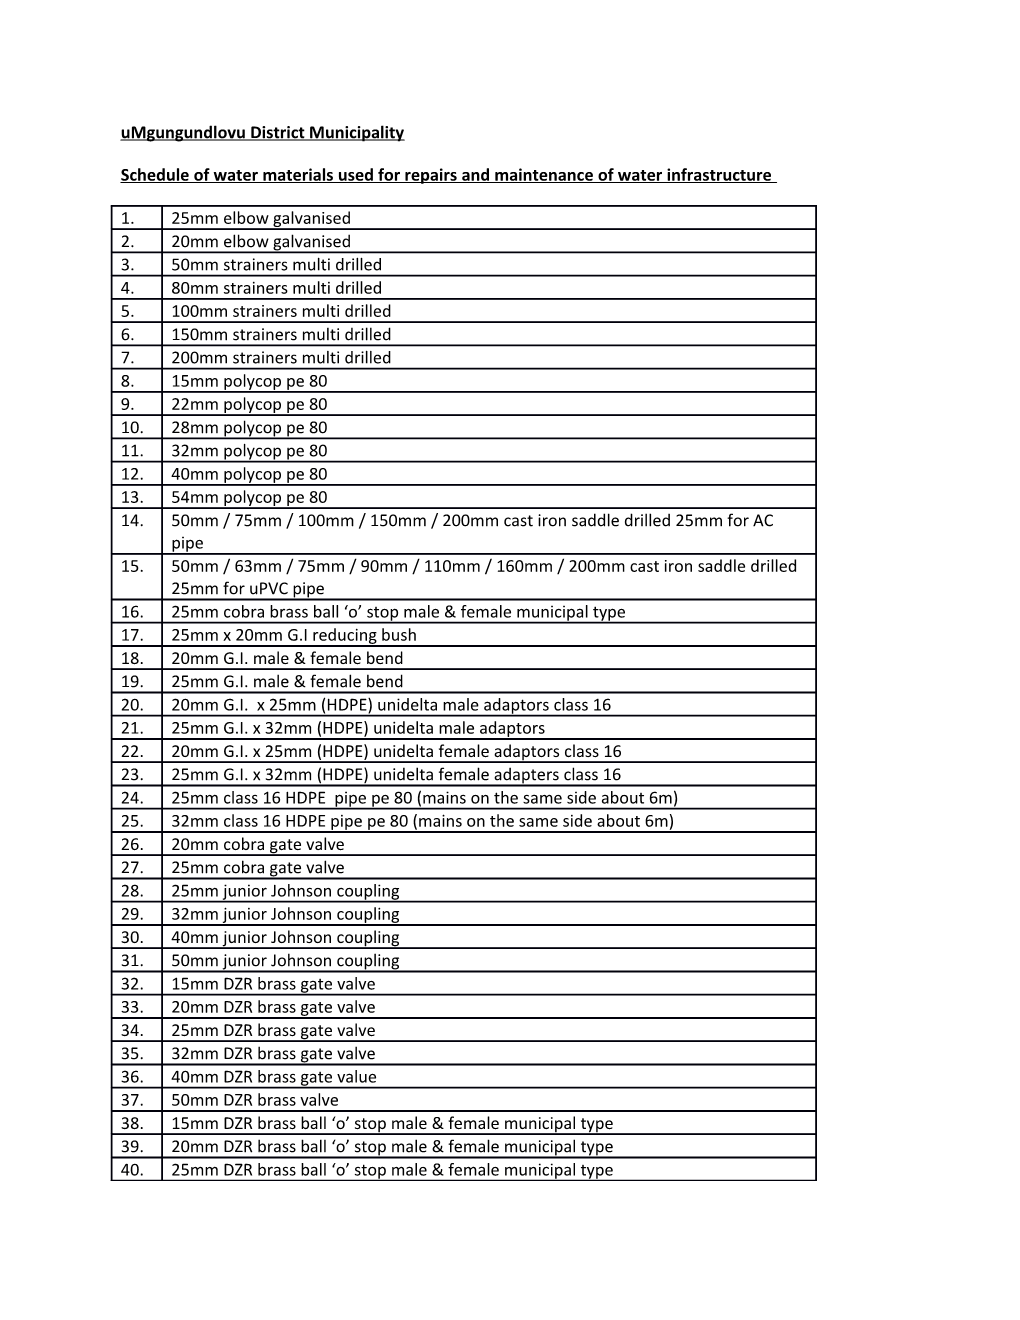 Schedule of Water Materials Used for Repairs and Maintenance of Water Infrastructure